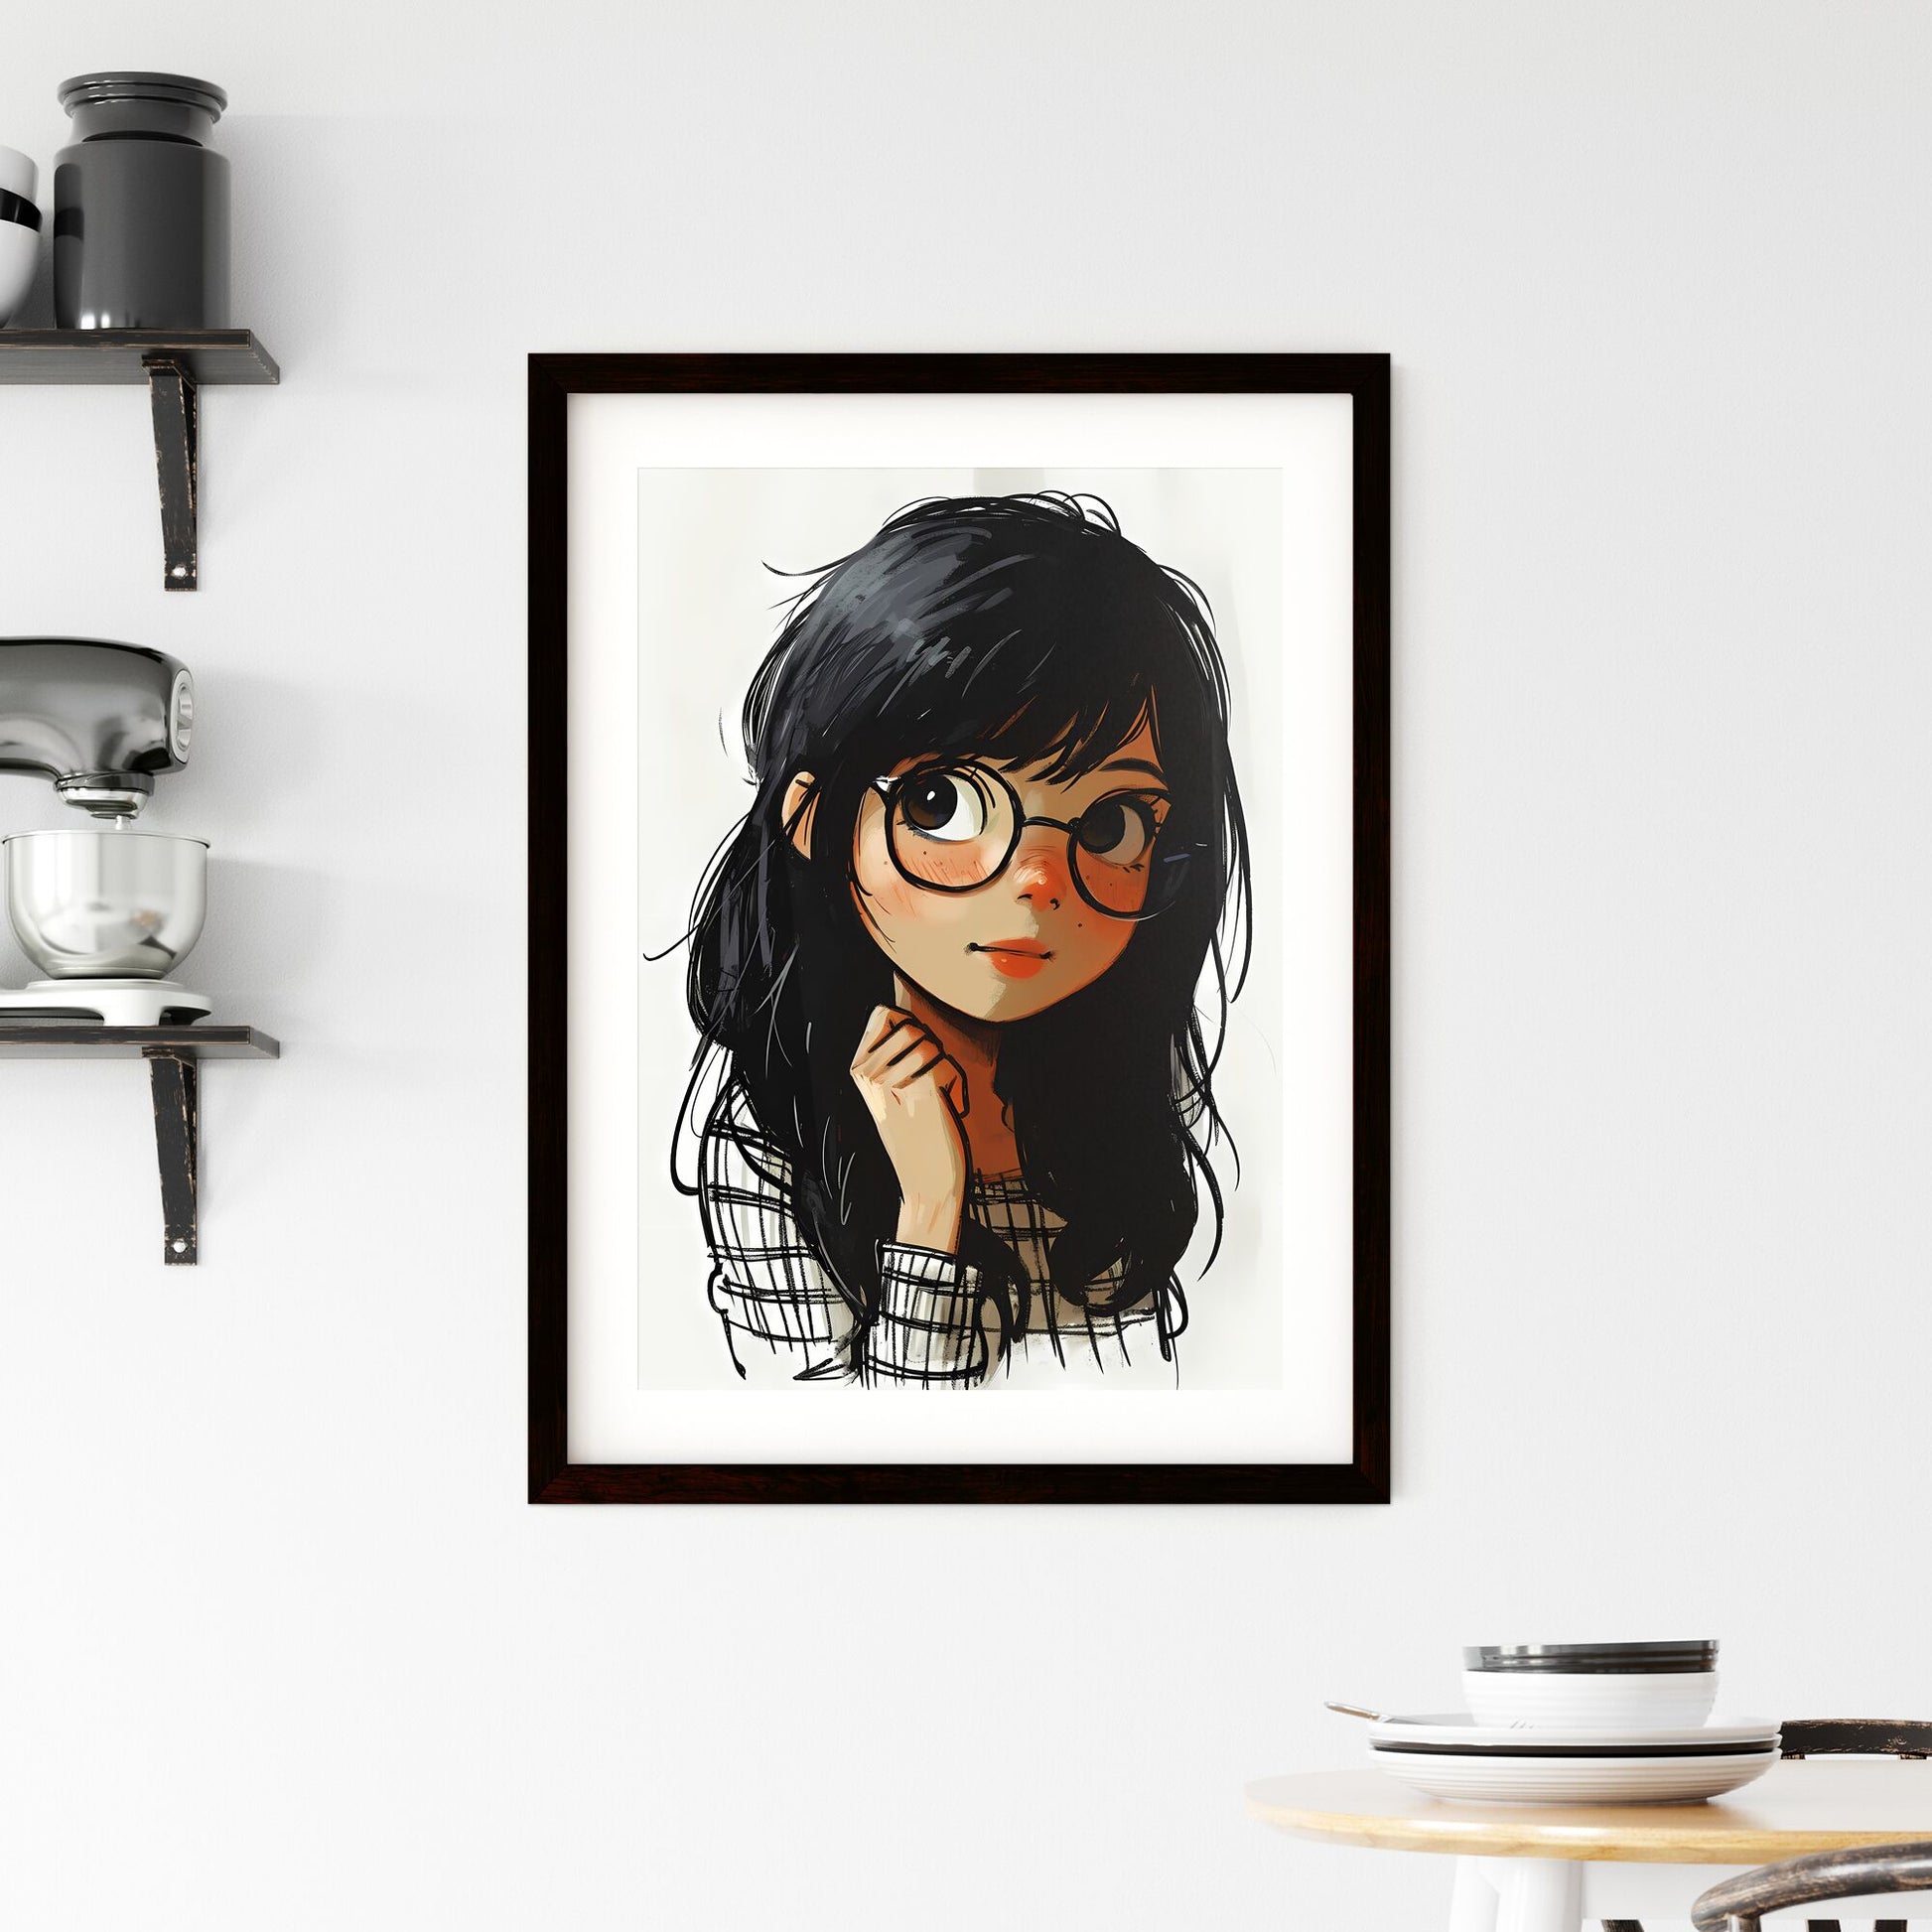 A Poster of a line drawing of a cute cartoon girl - A Cartoon Of A Girl With Glasses Default Title